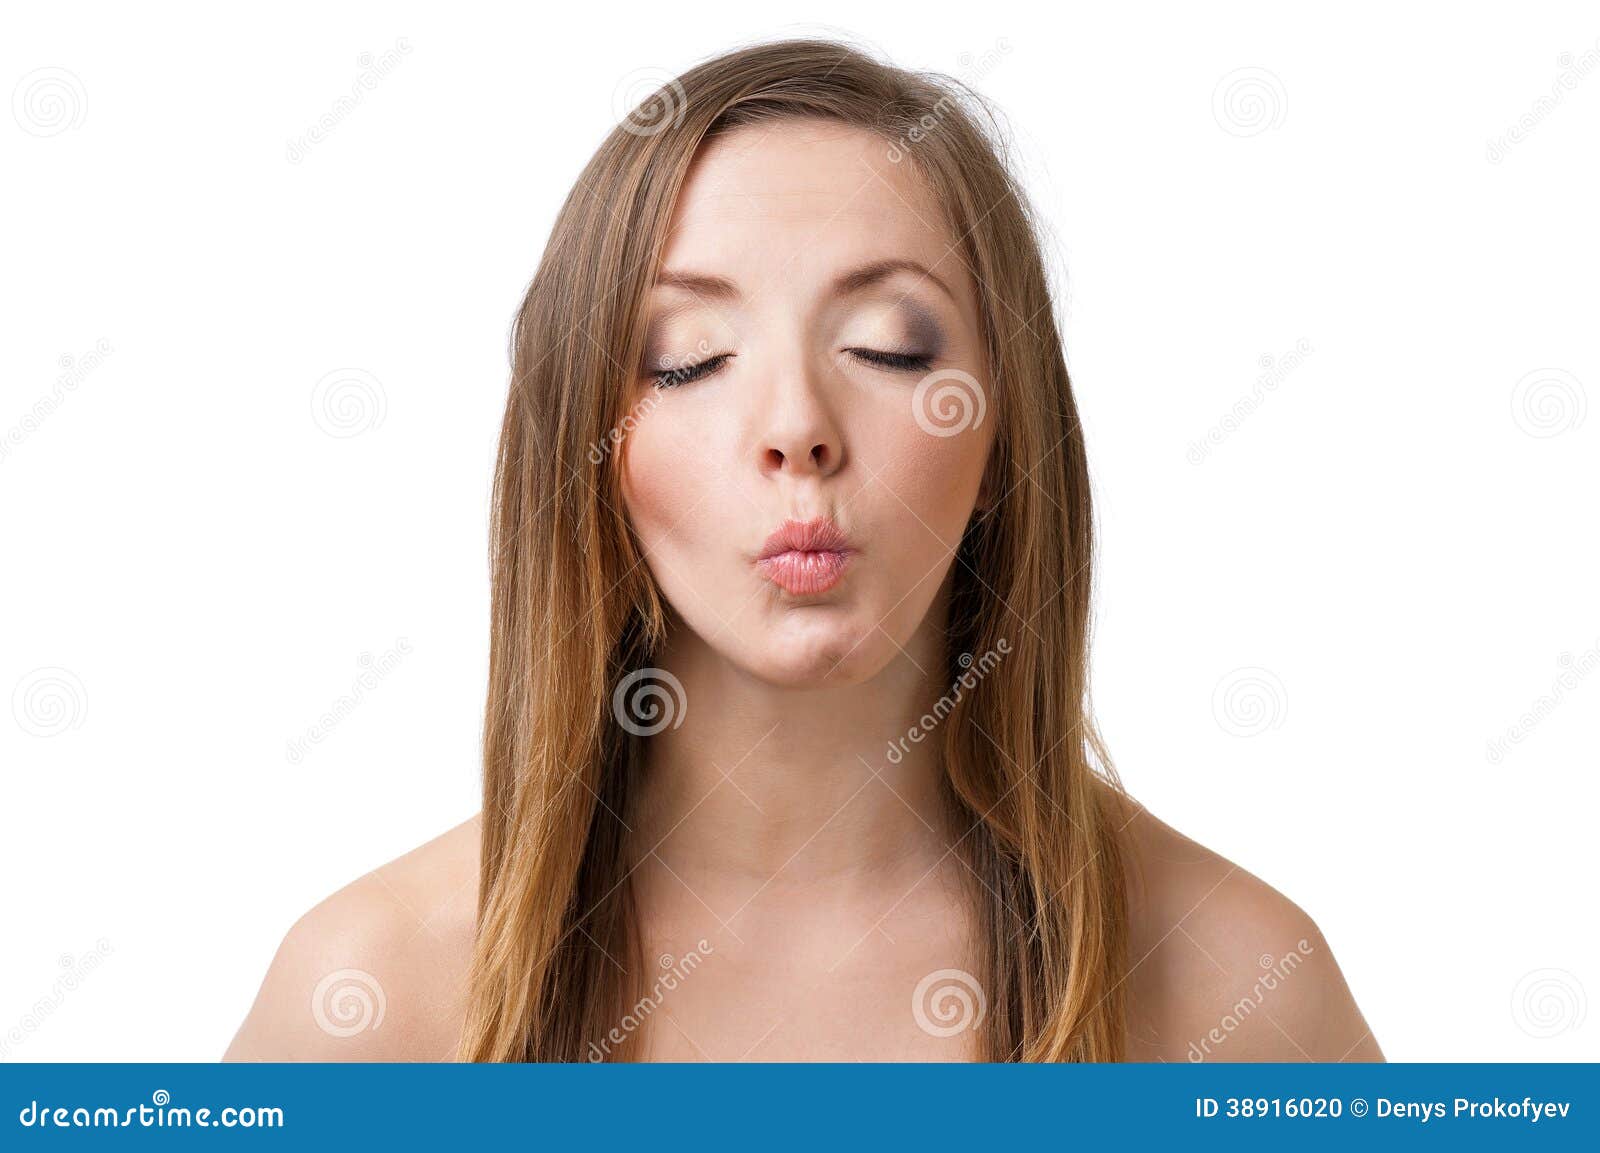 Emotional portrait stock photo. Image of healthy, human - 38916020